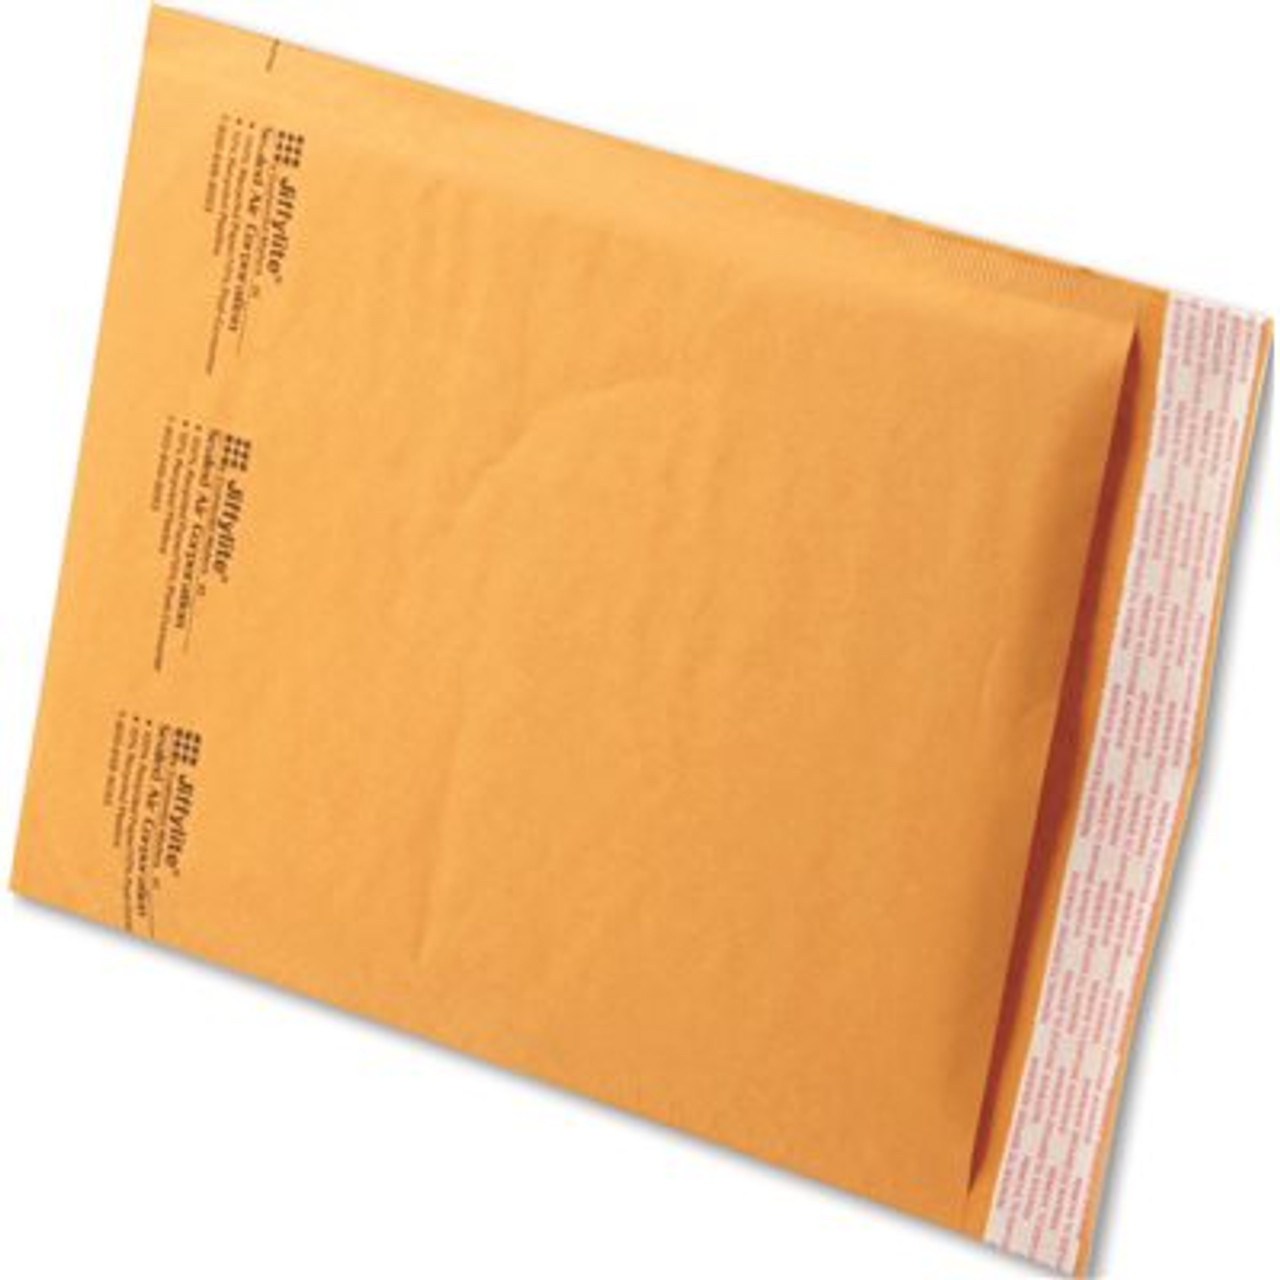 Anle Paper/Sealed Air Corp. JIFFYLITE SELF-SEAL MAILER, SIDE SEAM, #2, 8 1/2 X 12, GOLDEN BROWN, 100/CARTON